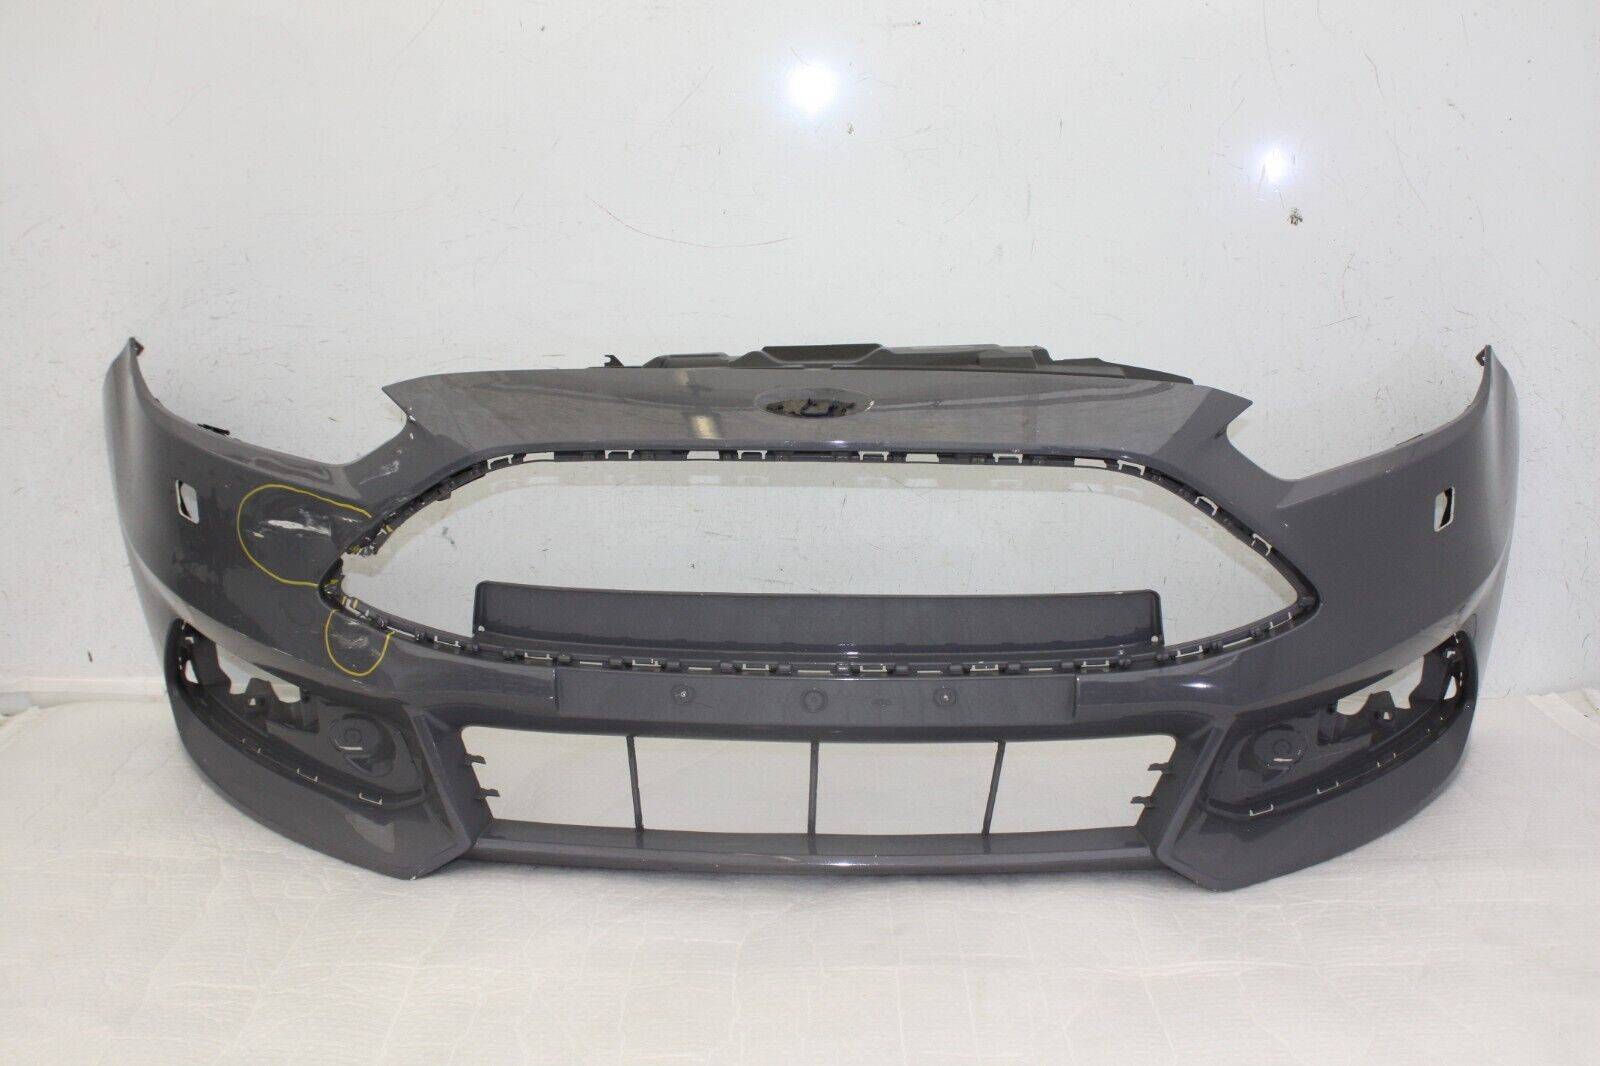 Ford Focus ST Front Bumper 2014 TO 2018 F1EB 17757 B Genuine DAMAGED 176328343136